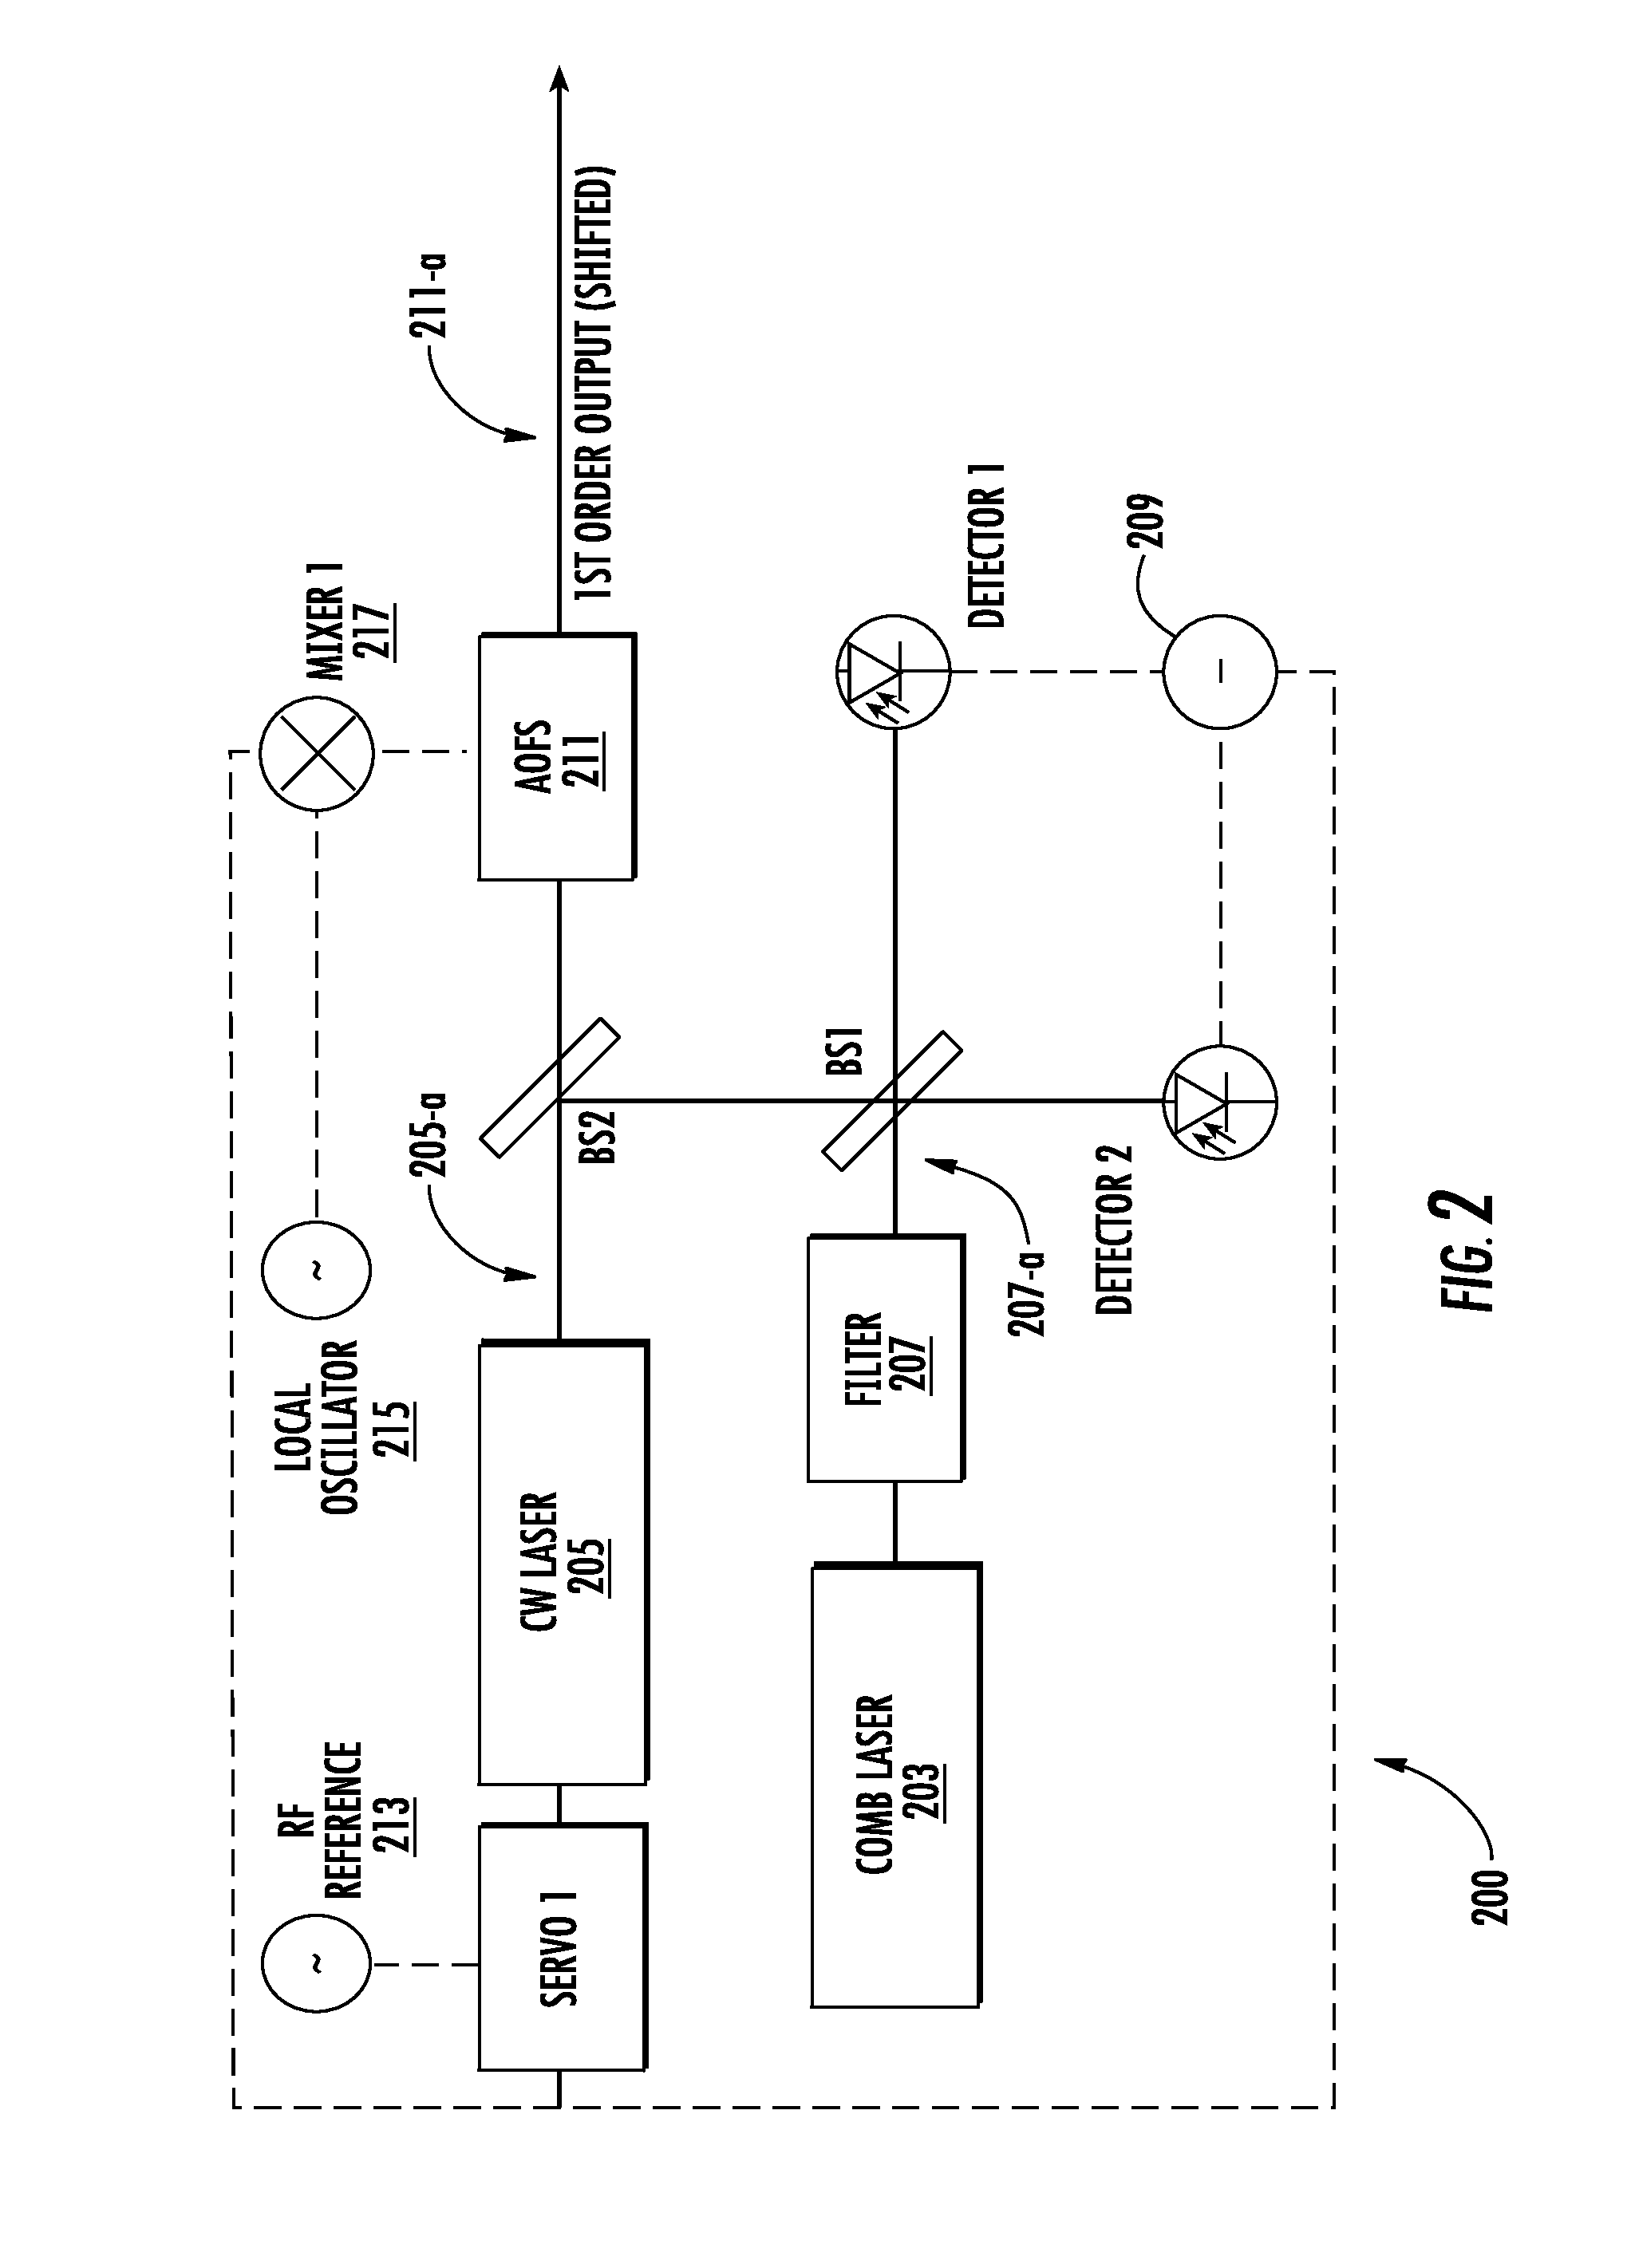 Methods for precision optical frequency synthesis and molecular detection